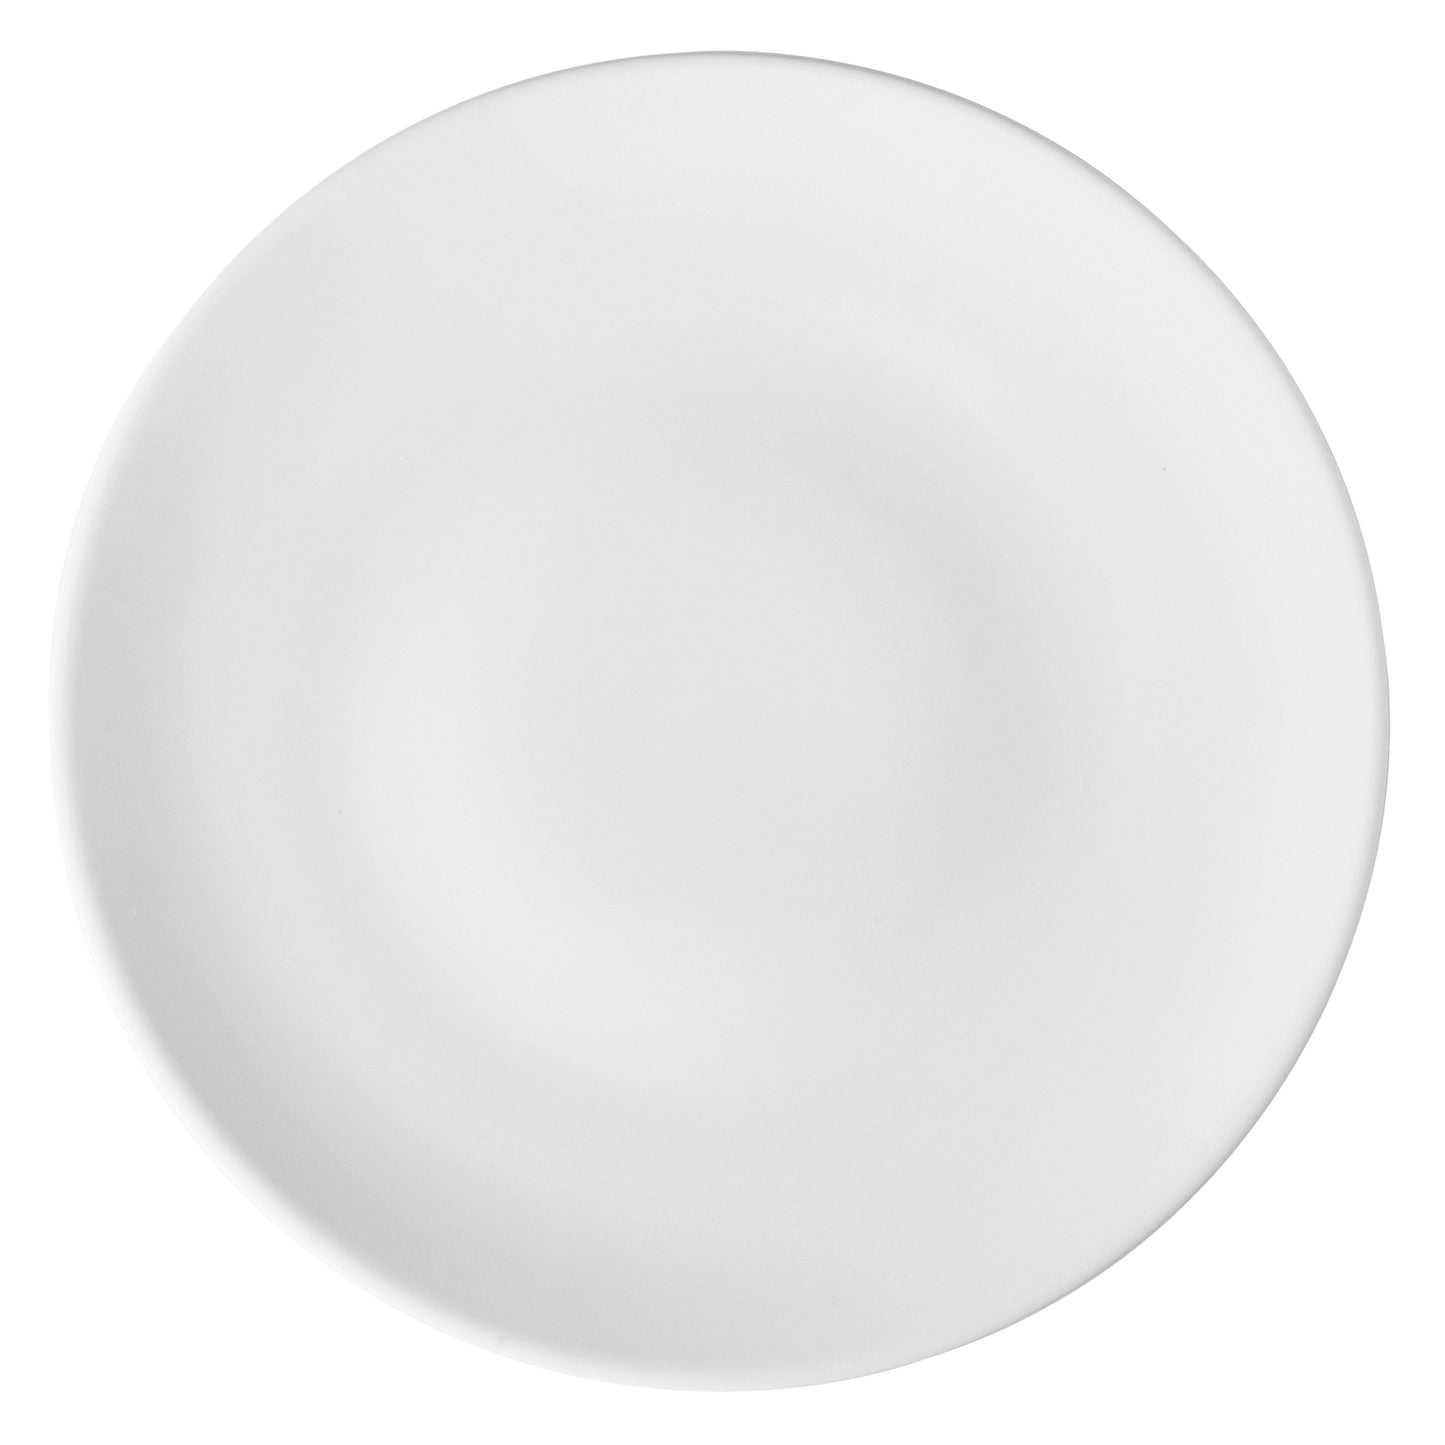 11" Bright White Porcelain Coupe Plate, Corona Actualite (Stocked) (12 Pack)